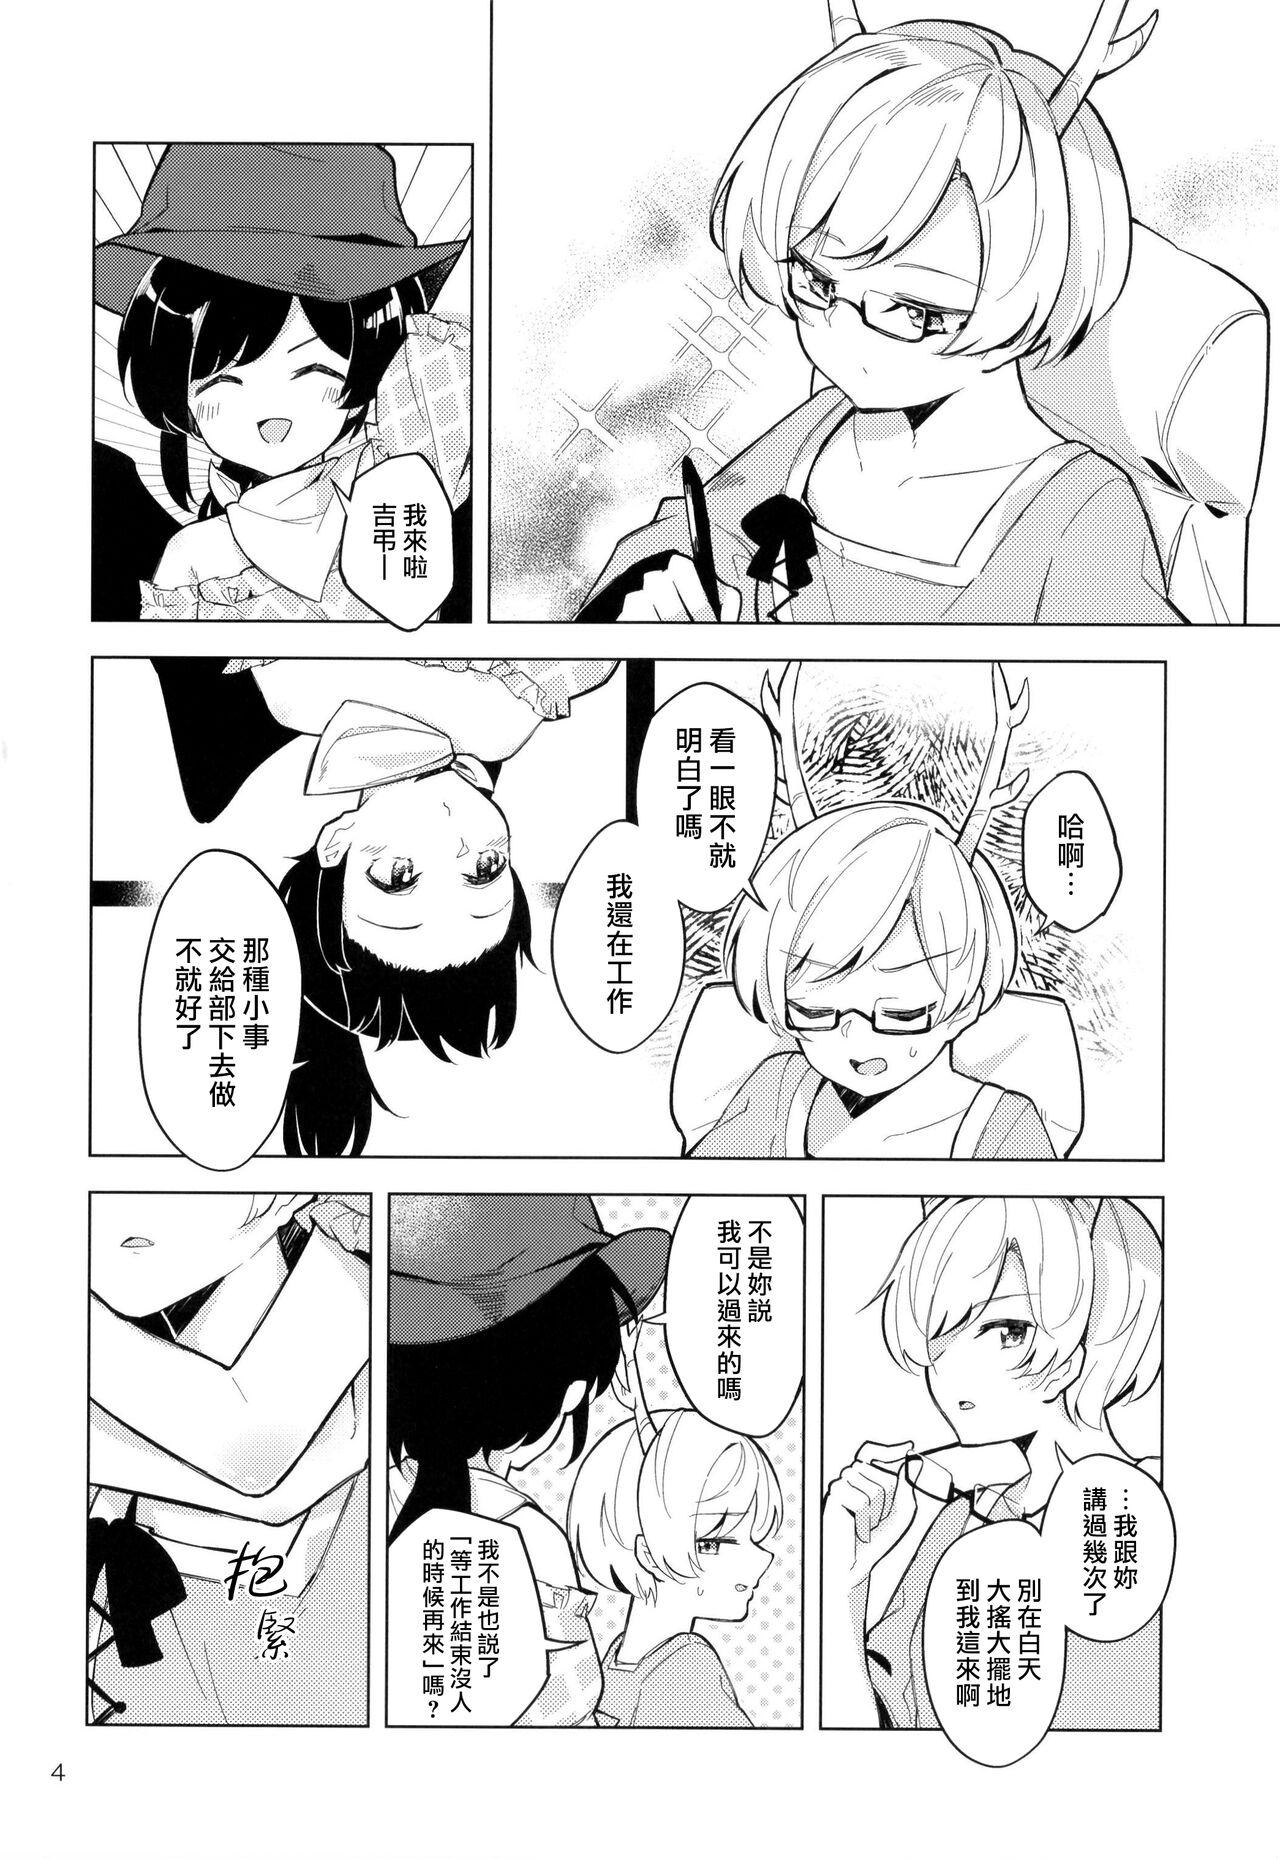 Big Natural Tits 笨蛋和心都止不住躁動 - Touhou project Couple - Page 4